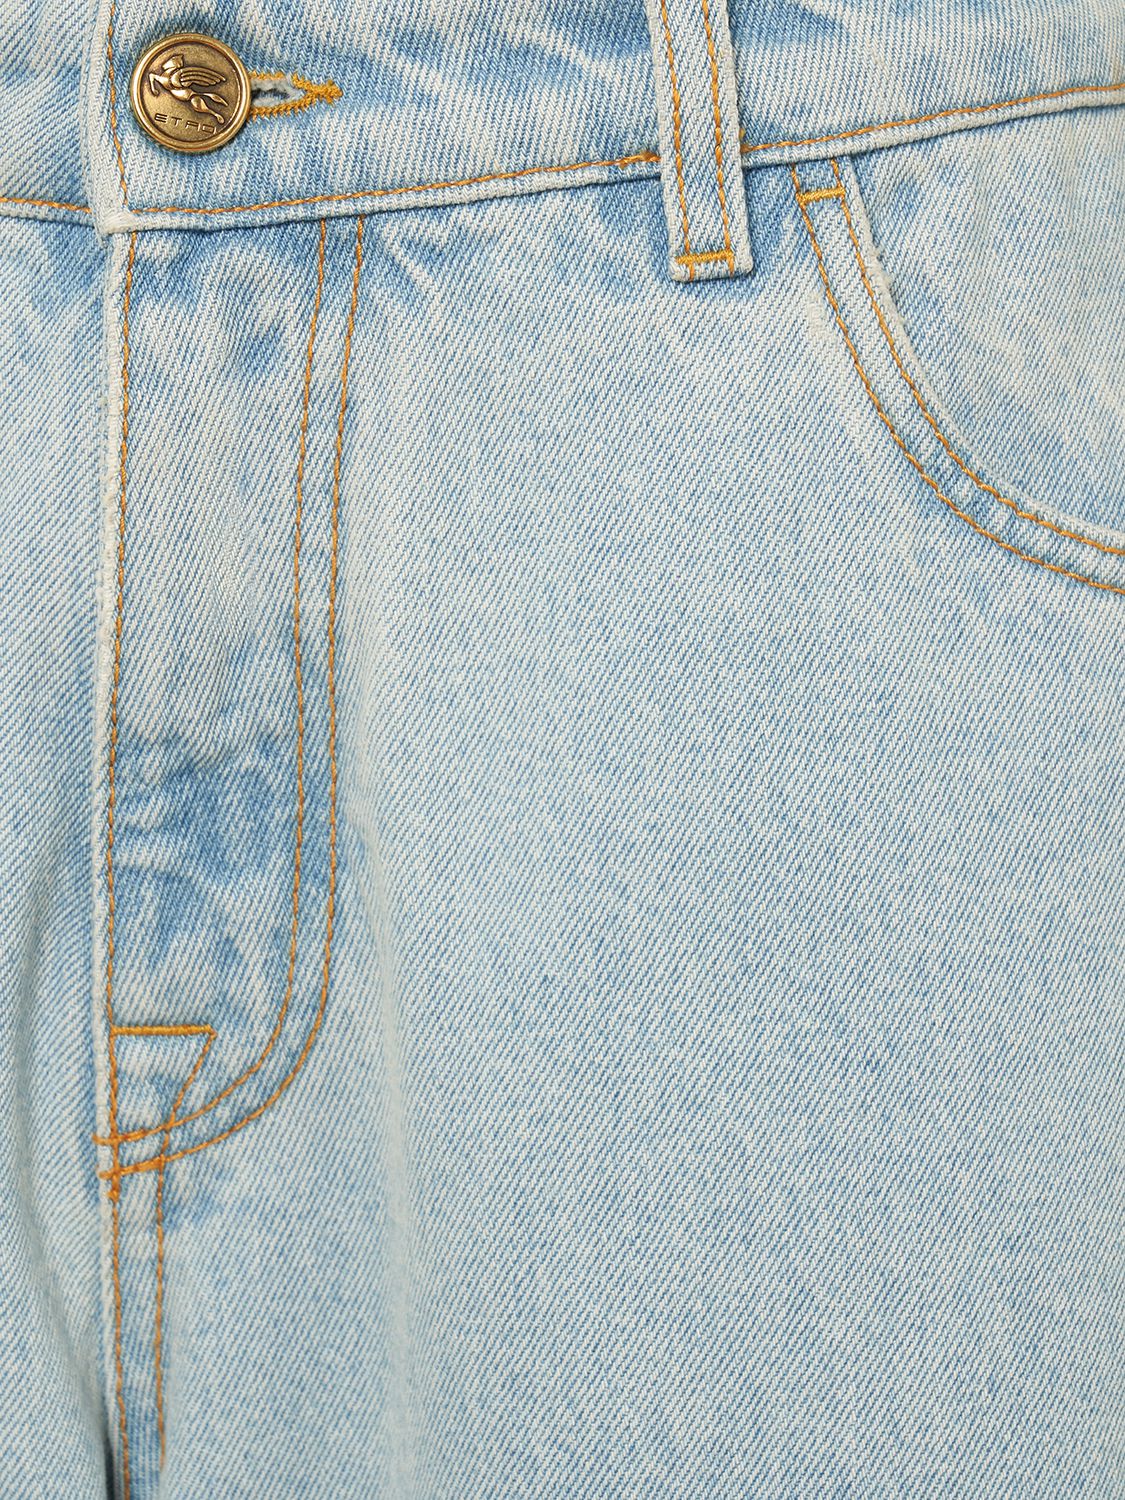 Shop Etro Washed Denim High Rise Wide Jeans In Light Blue